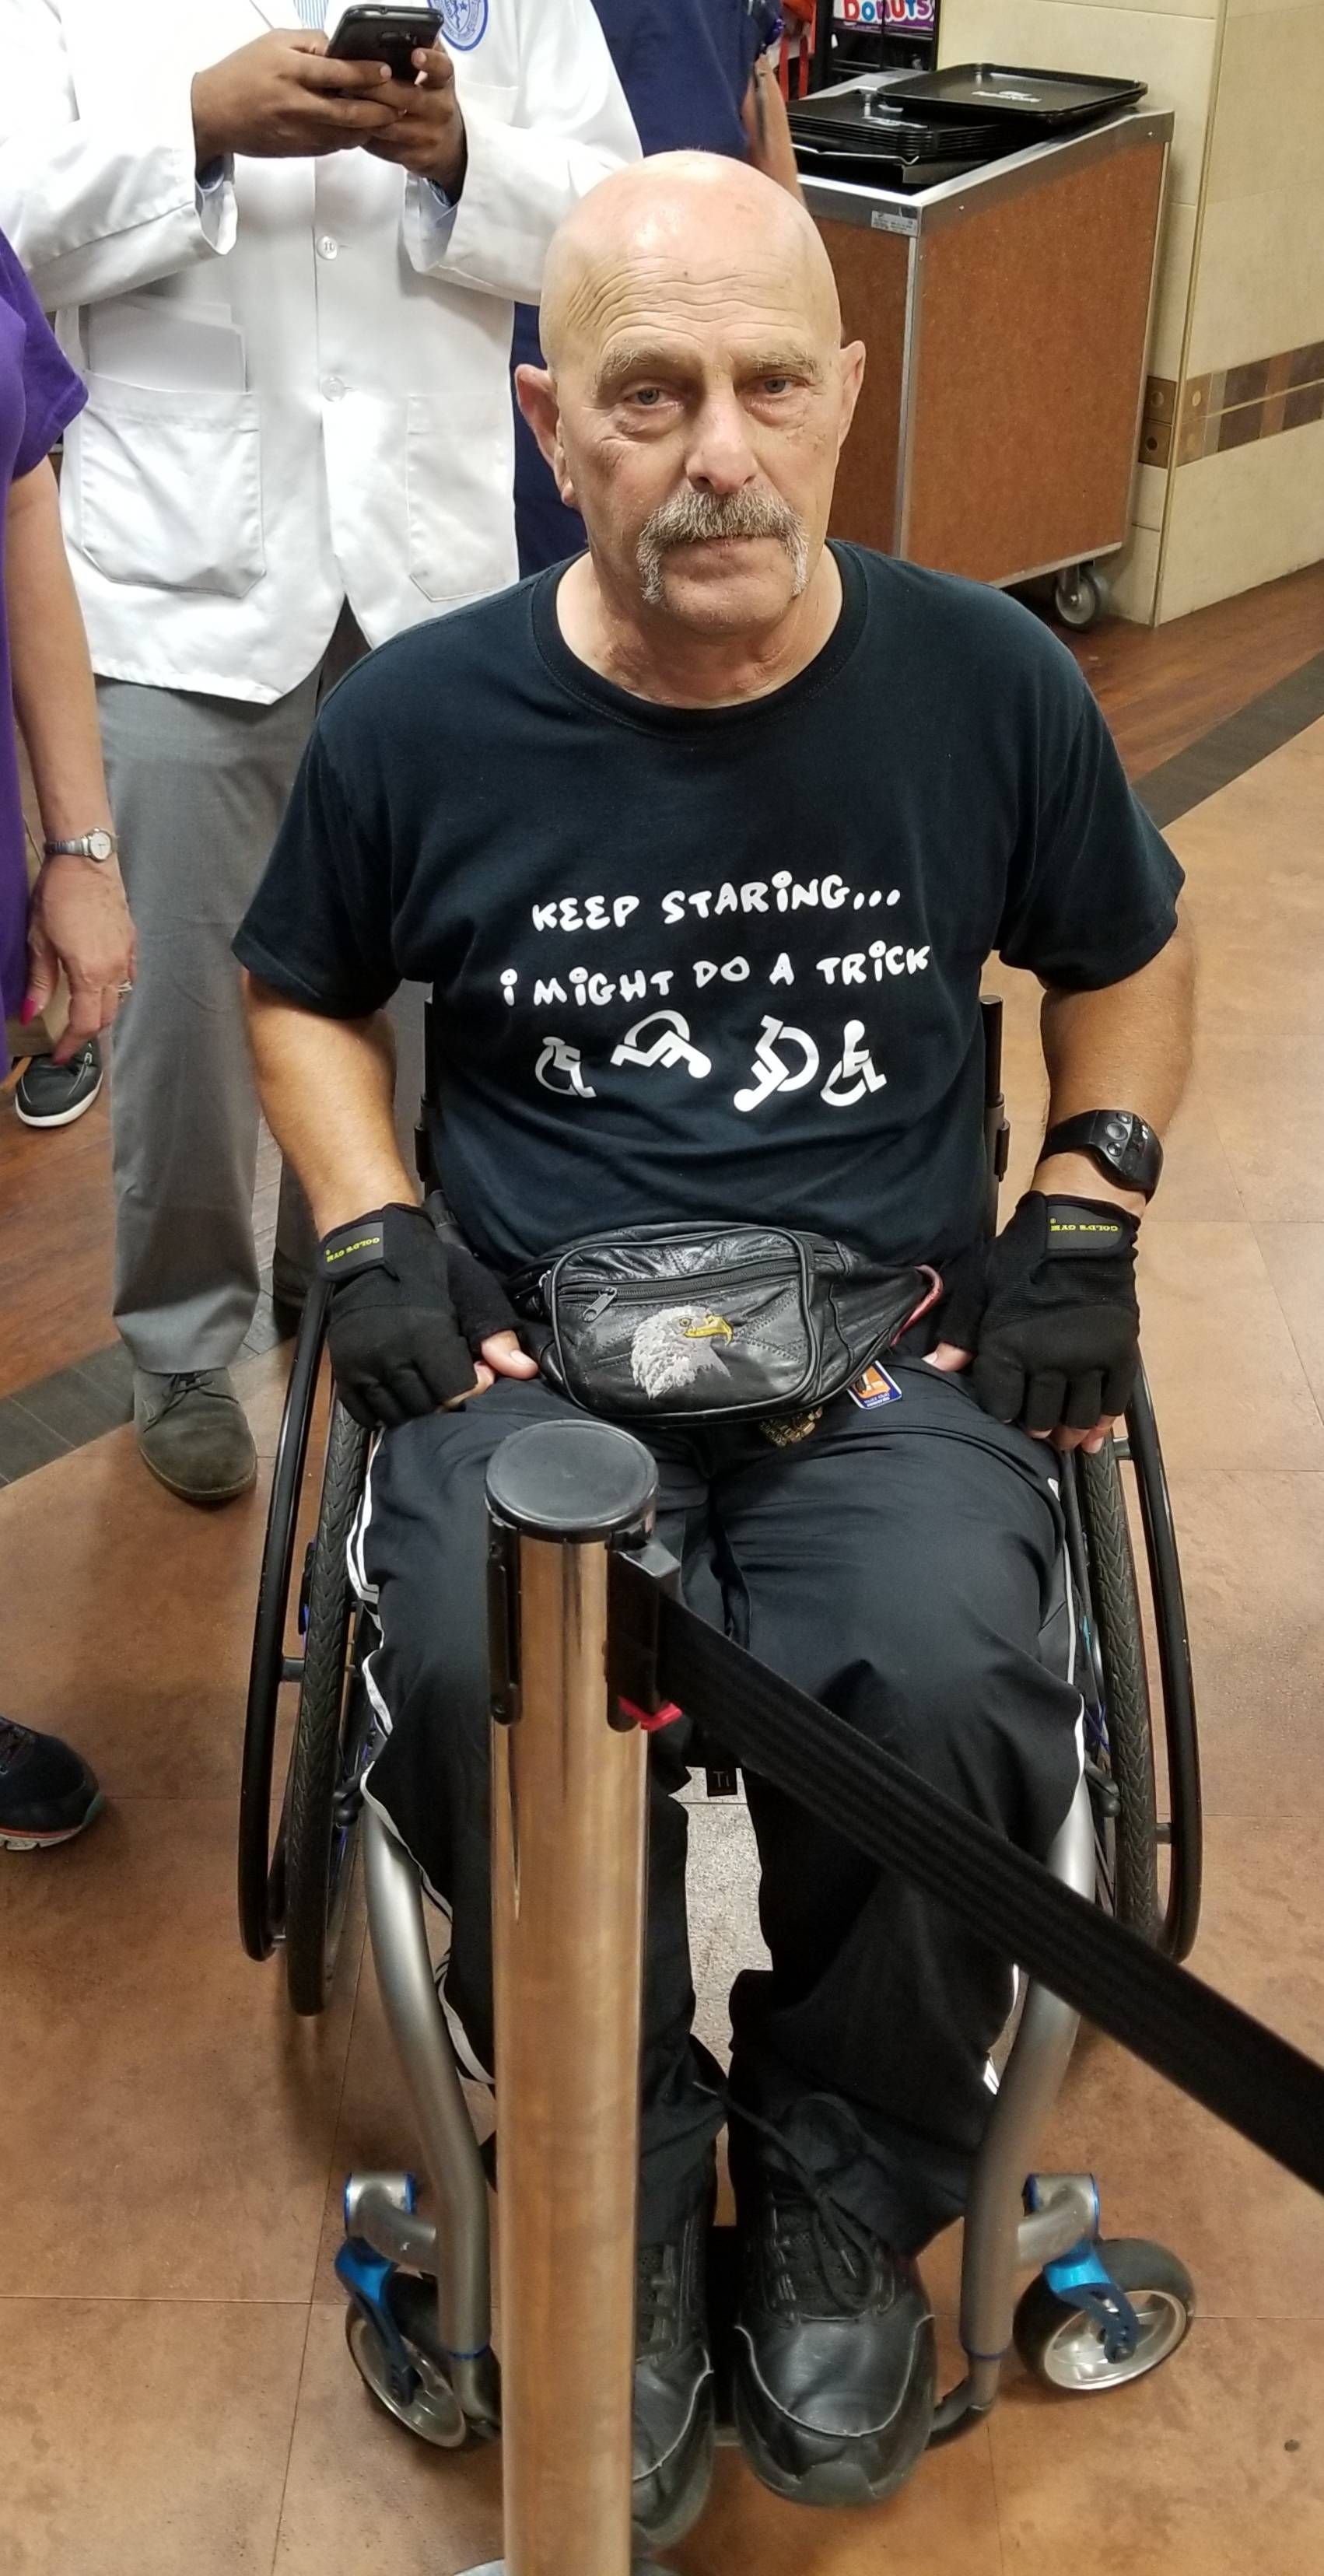 Was at the VA Hospital today when I ran into this guy and his shirt.